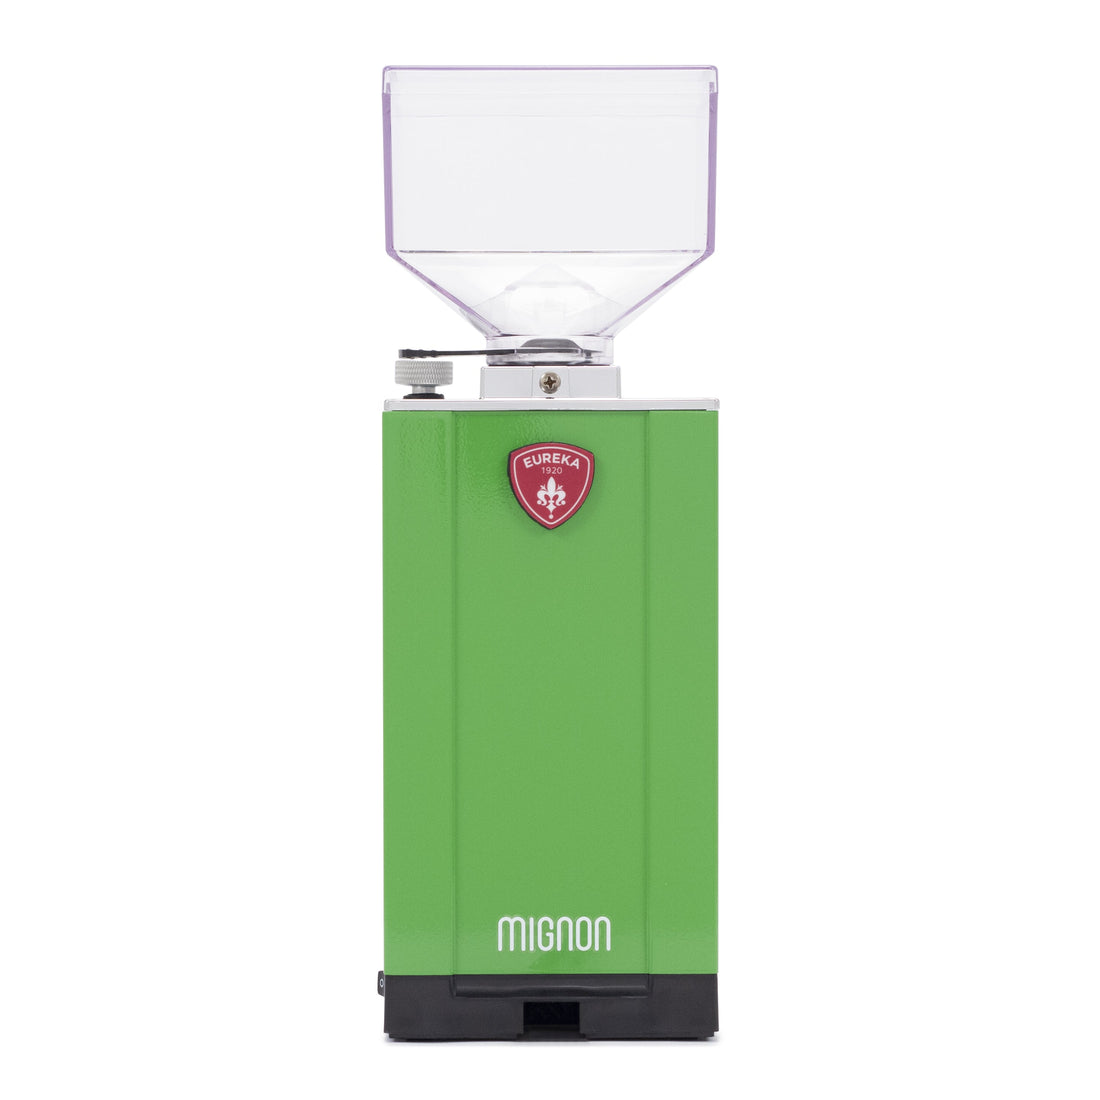 Eureka Mignon Magnifico Coffee Grinder in Lime Green Rear Facing || lime green